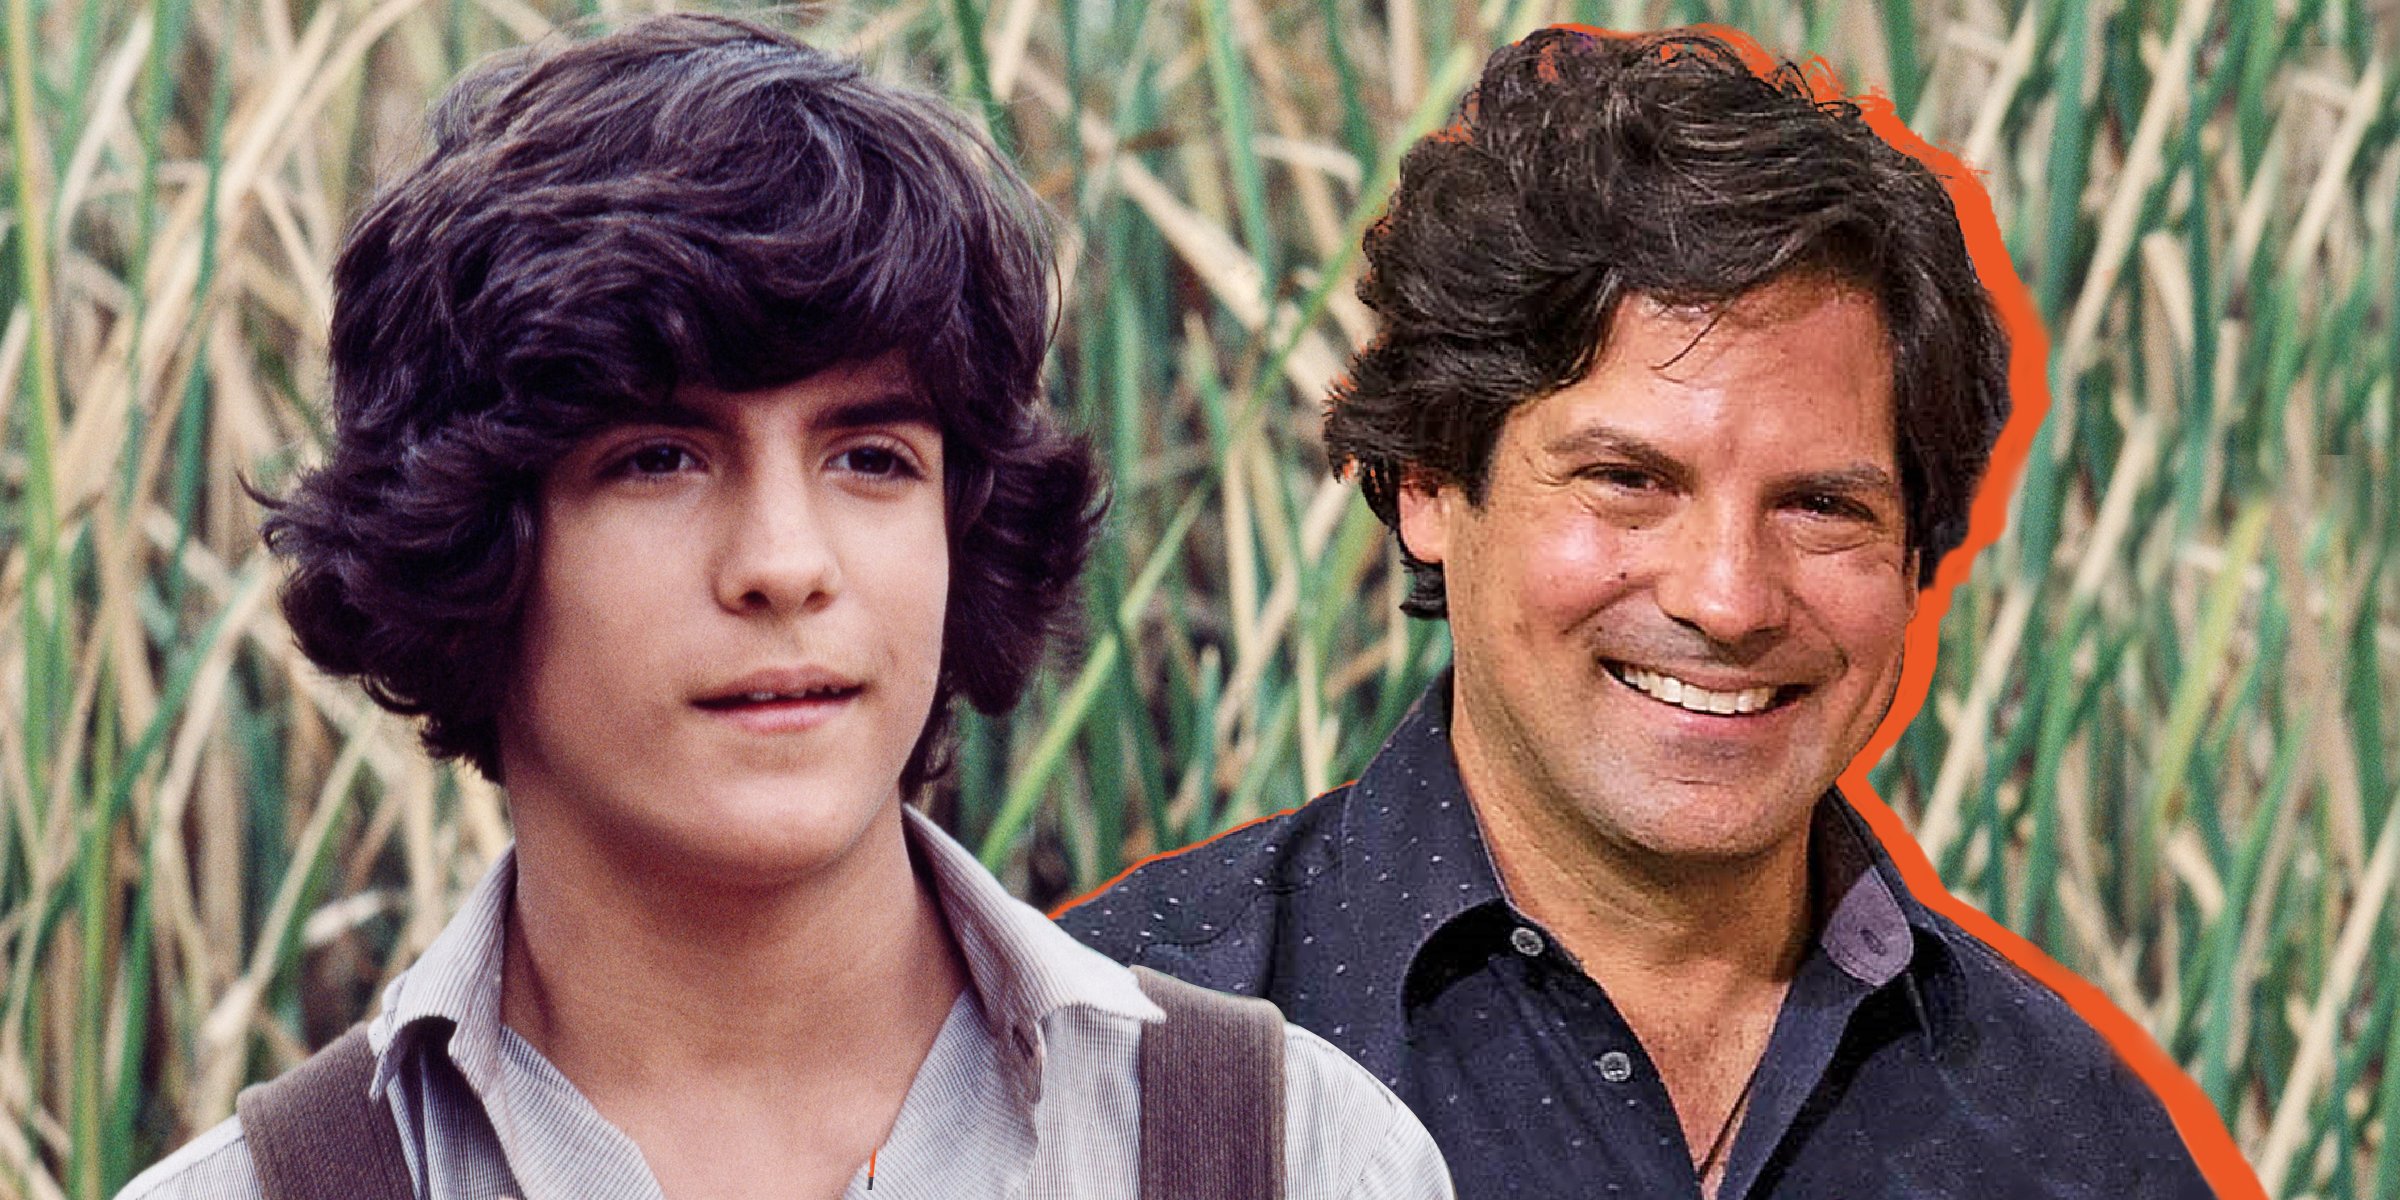 Matthew Labyorteaux, 1970s | Matthew Labyorteaux, 2014 | Source: Getty Images